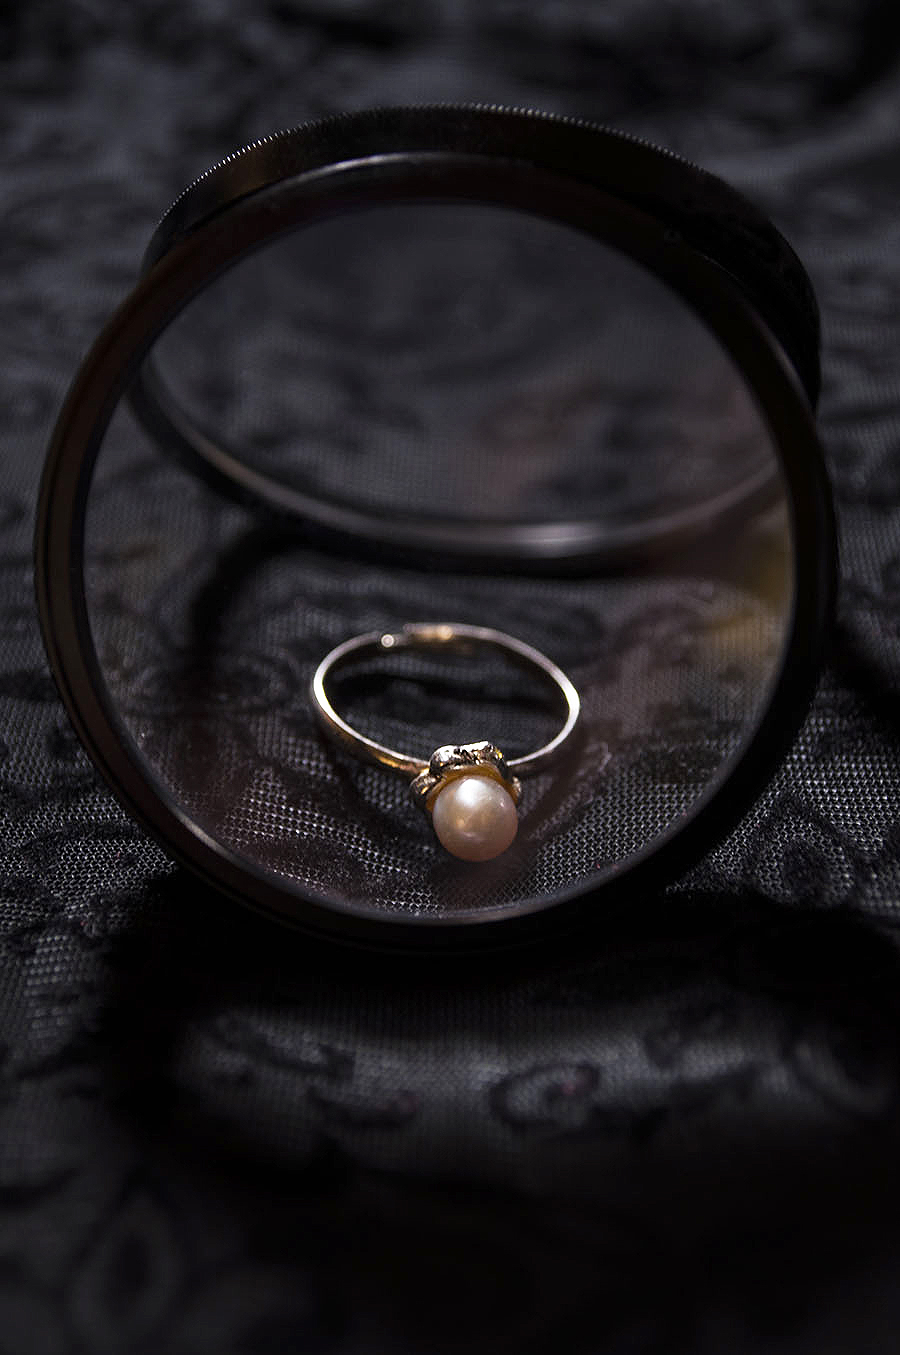 Rebecca_Huang_still_life_photography_velvet_accessories_jewelry_ring_pearl_silver_peach_magnify_lens_dark_reflection_UPenn_student_silver